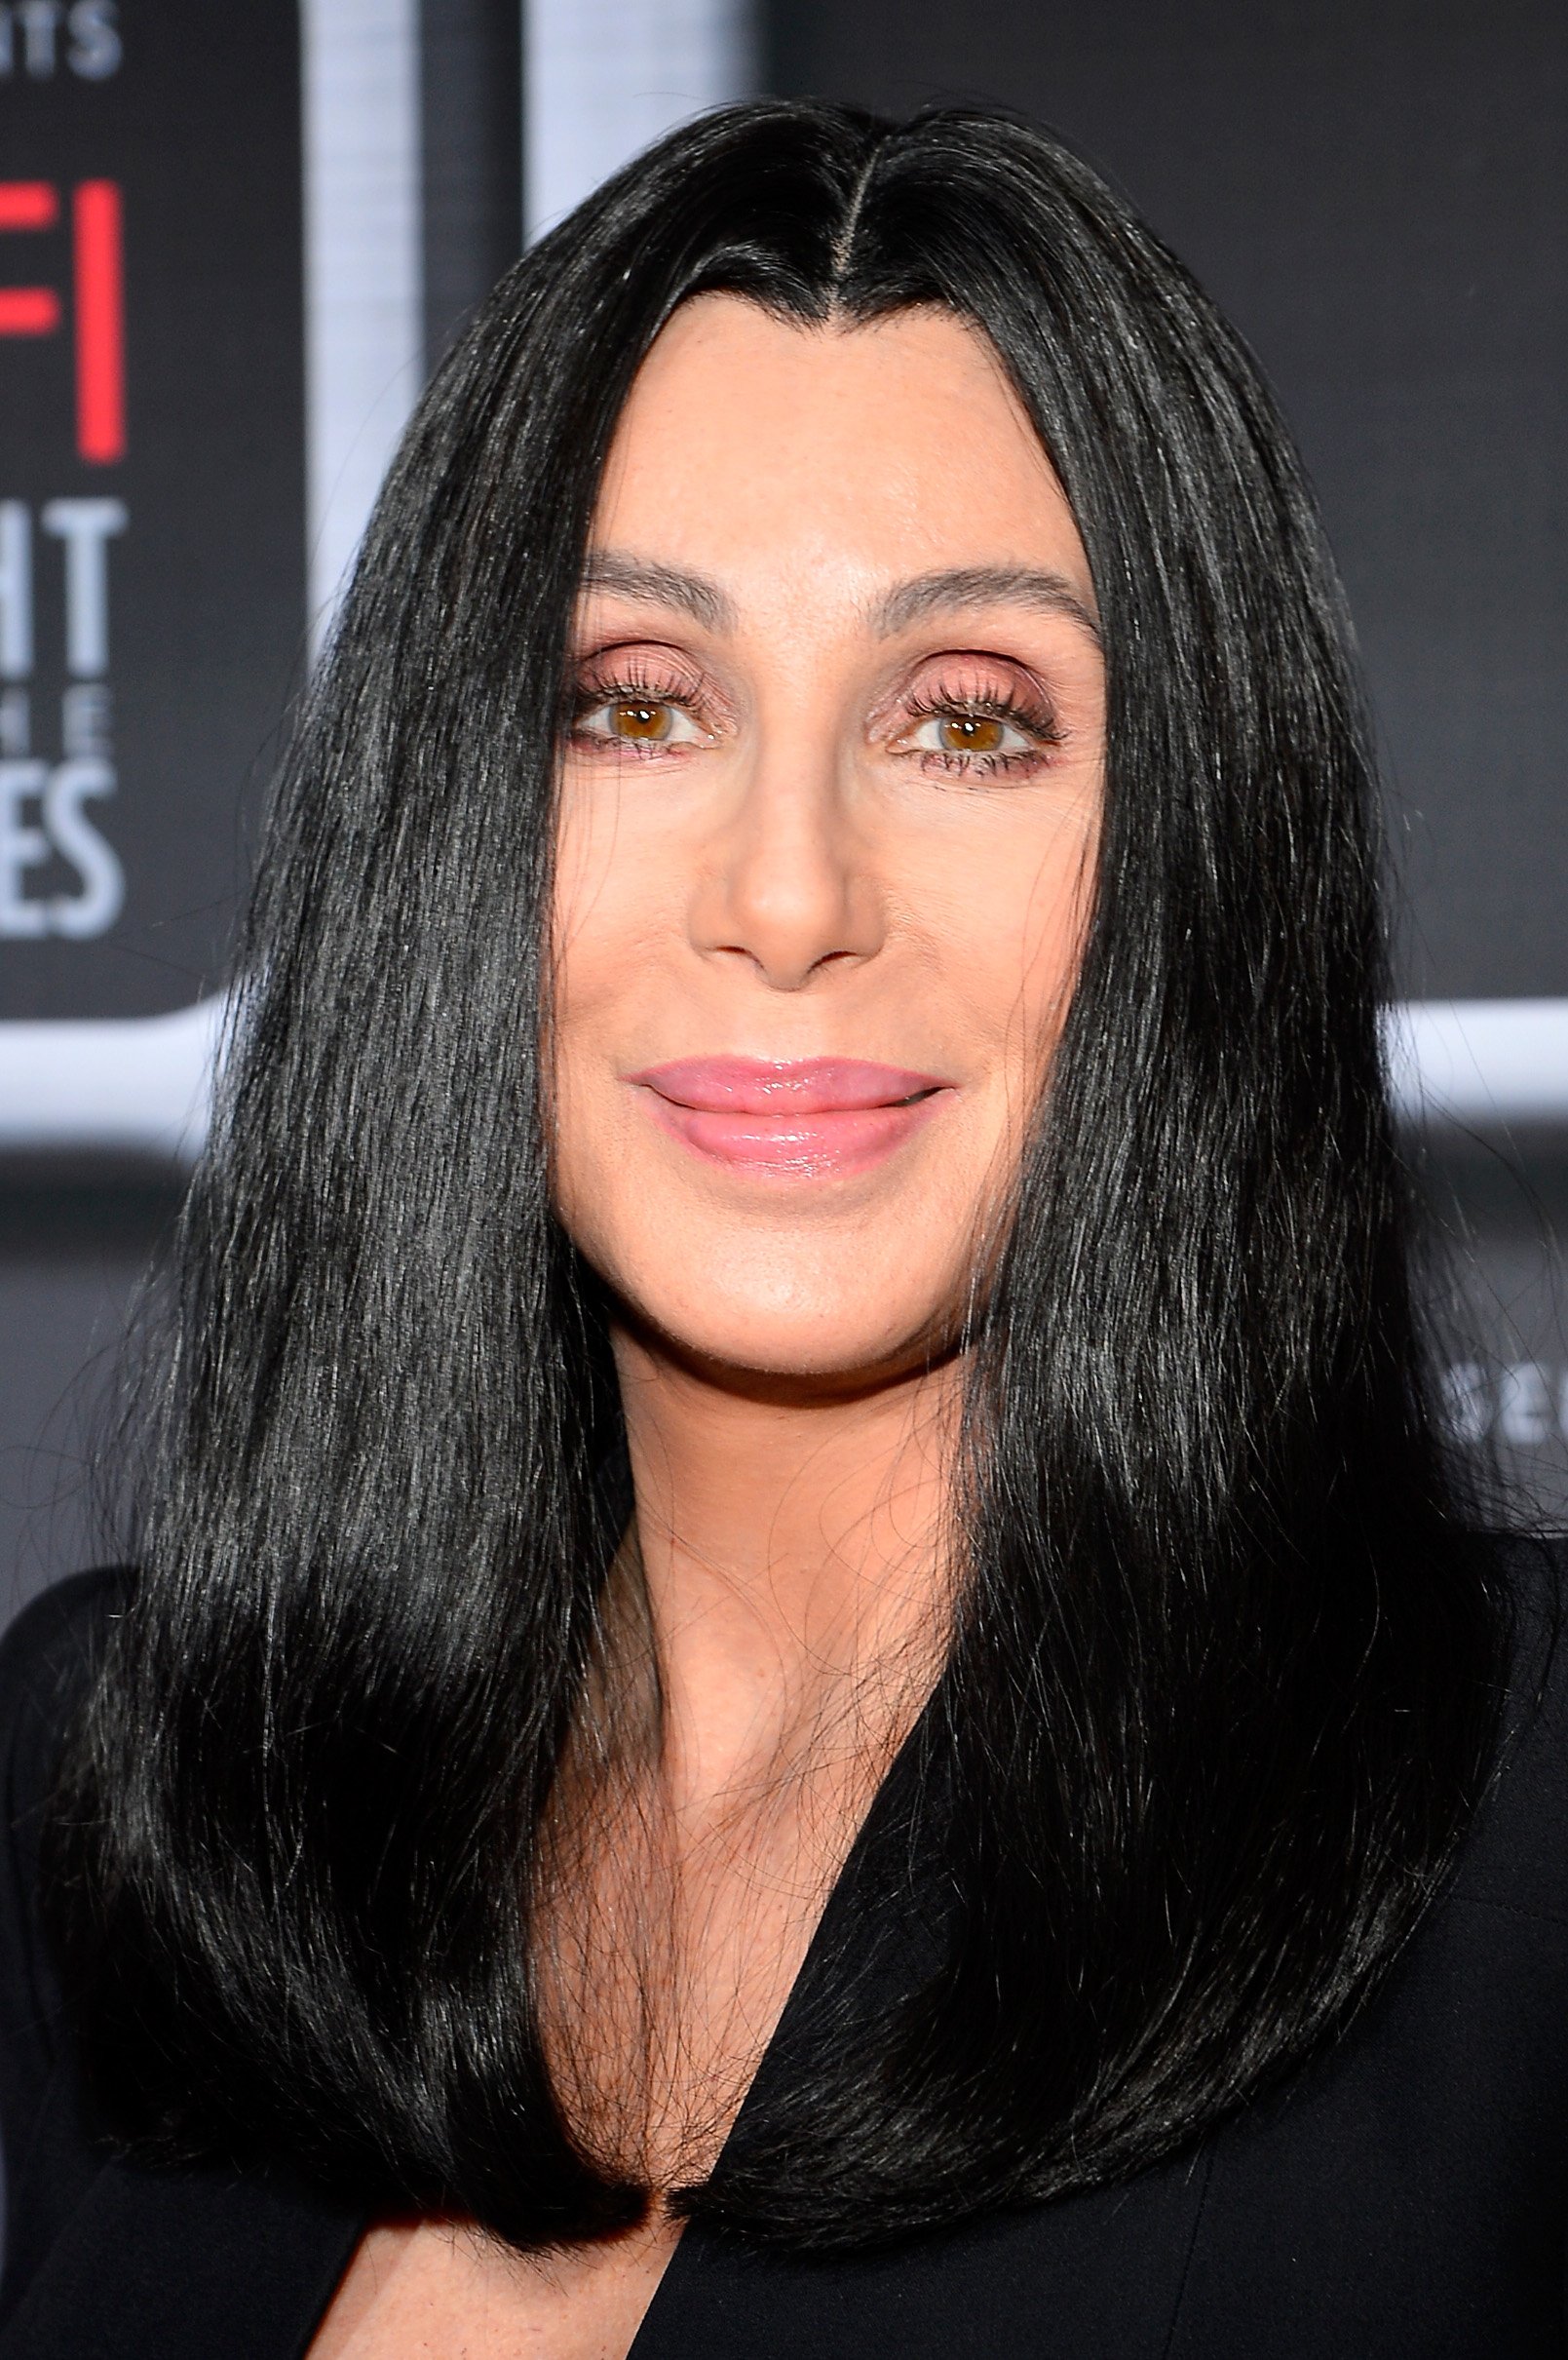 Singer/actress Cher arrives on the red carpet for Target Presents AFI's Night at the Movies at ArcLight Cinemas on April 24, 2013 in Hollywood, California. | Source: Getty Images